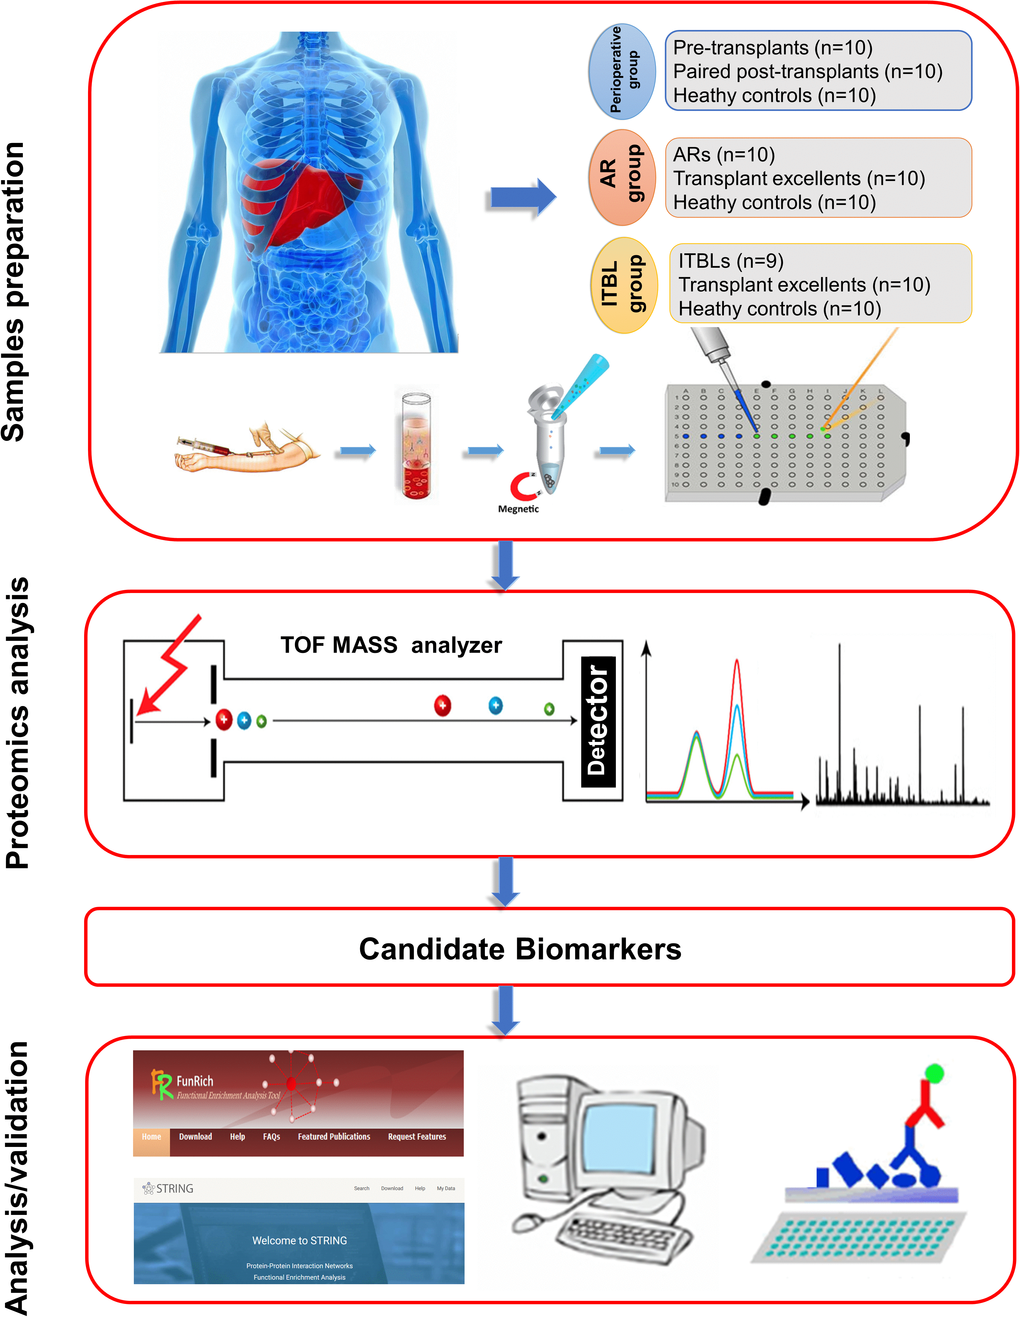 Schematic illustration of the workflow: from blood collection to analysis and validation.